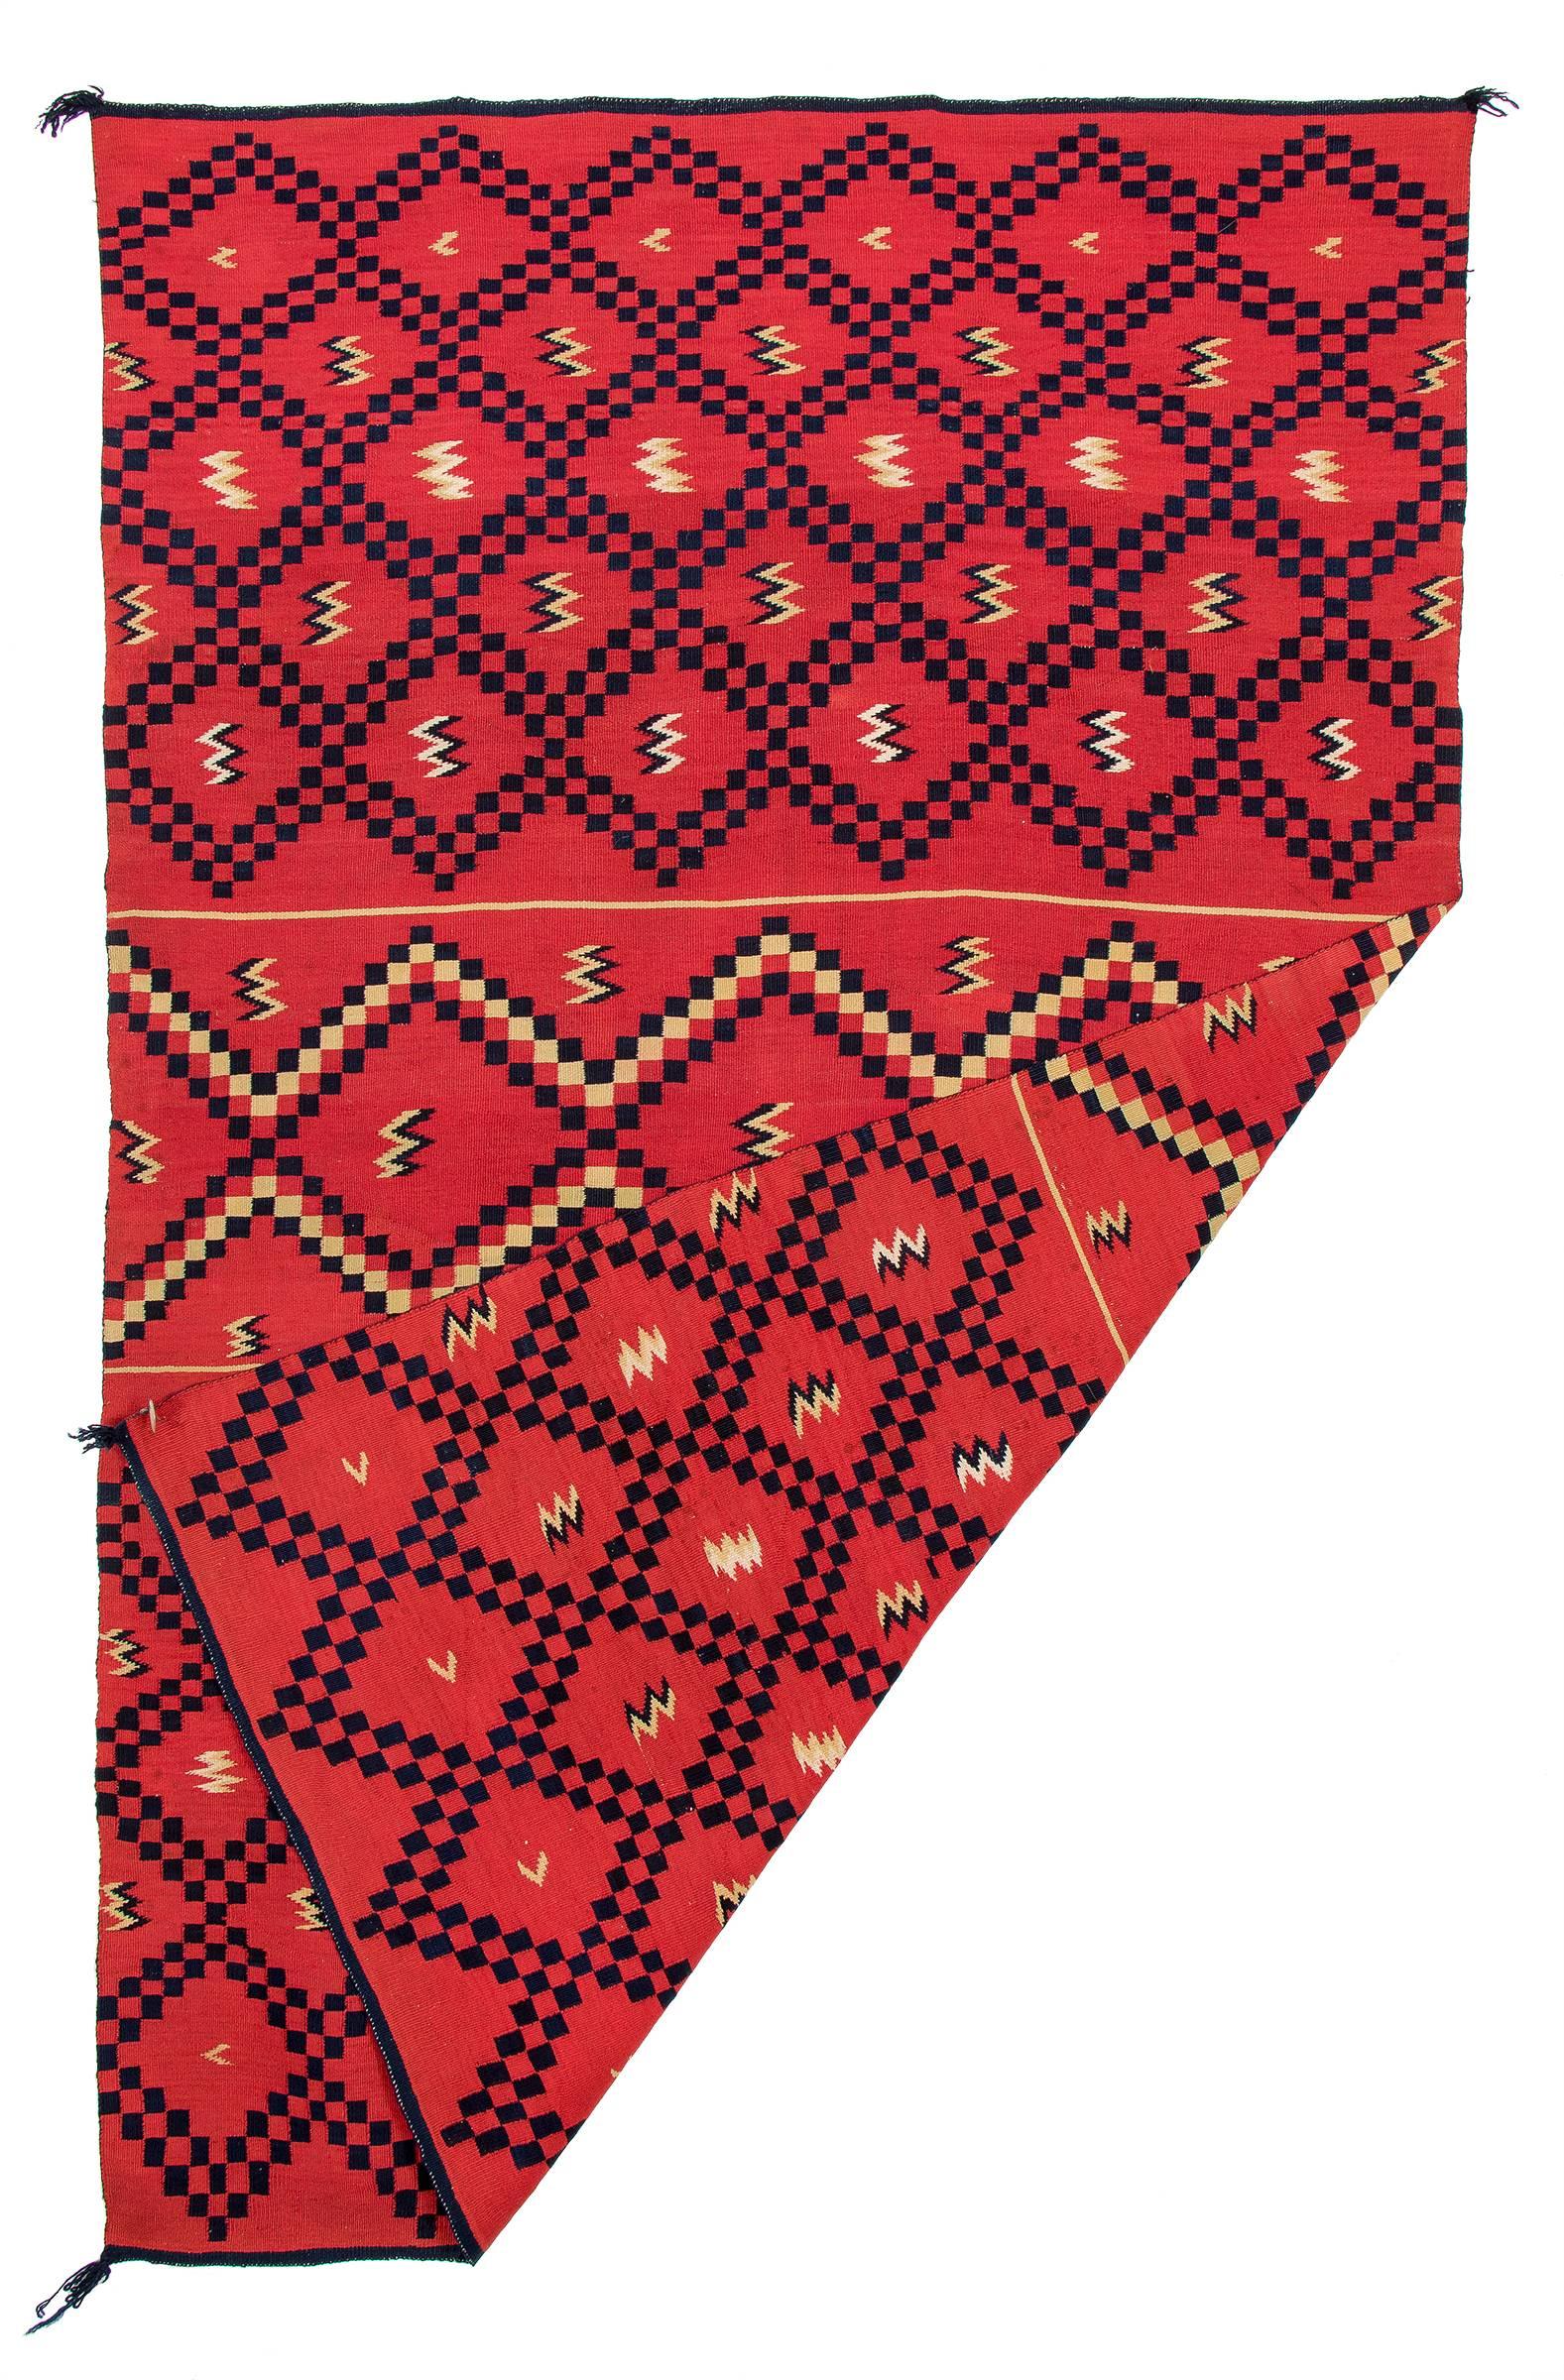 A Classic period (pre-reservation) Navajo sarape/blanket. Finely woven of native hand-spun wool with indigo (blue), rabbit brush (soft yellow) and cochineal (red) dye.

Provenance: 
Fred Harvey Company 
Herbert G. Wellington, New York
By